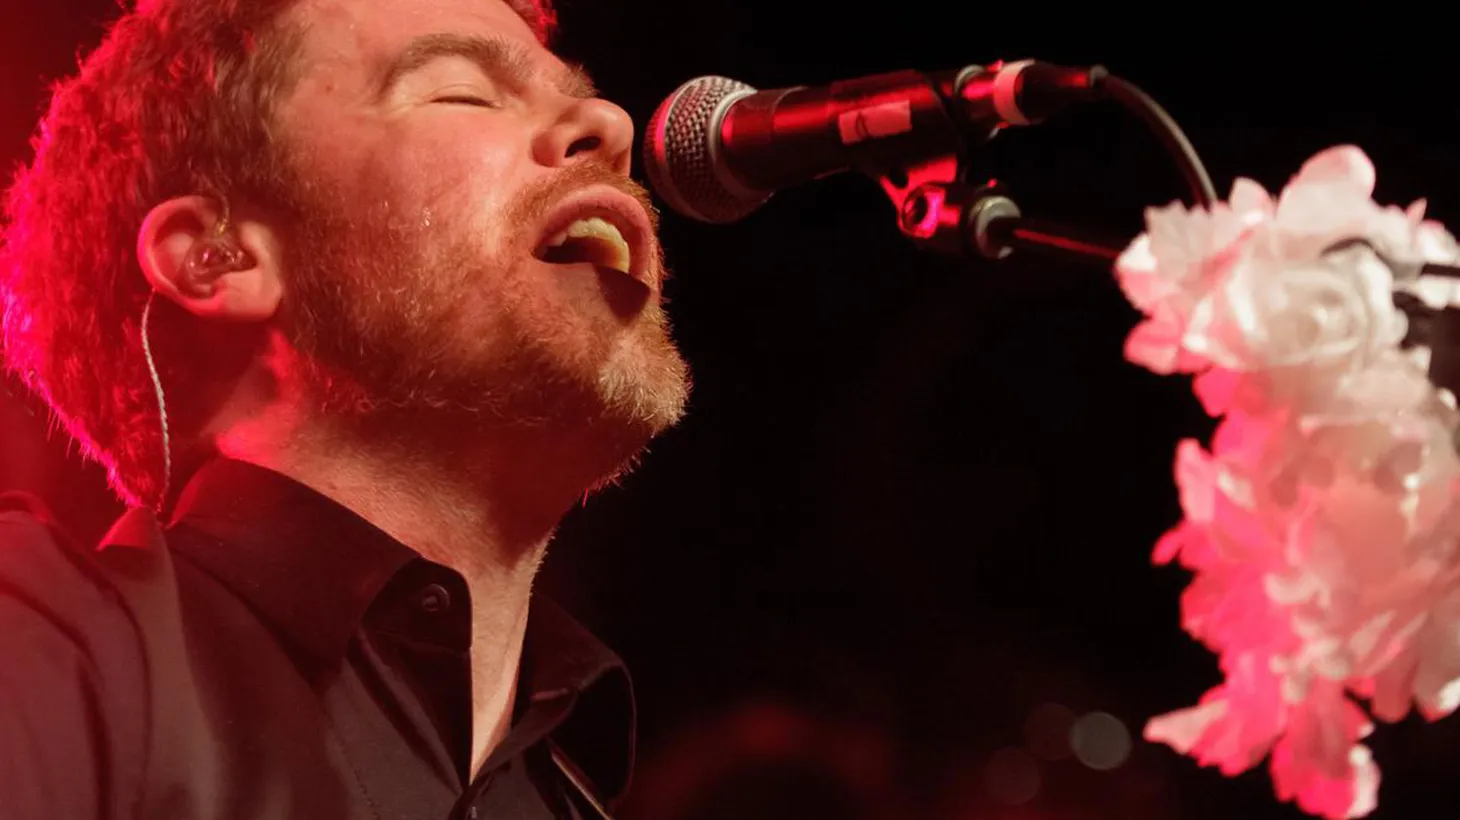 Josh Ritter is celebrated for his heartfelt songwriting, and his latest album is his most personal yet.